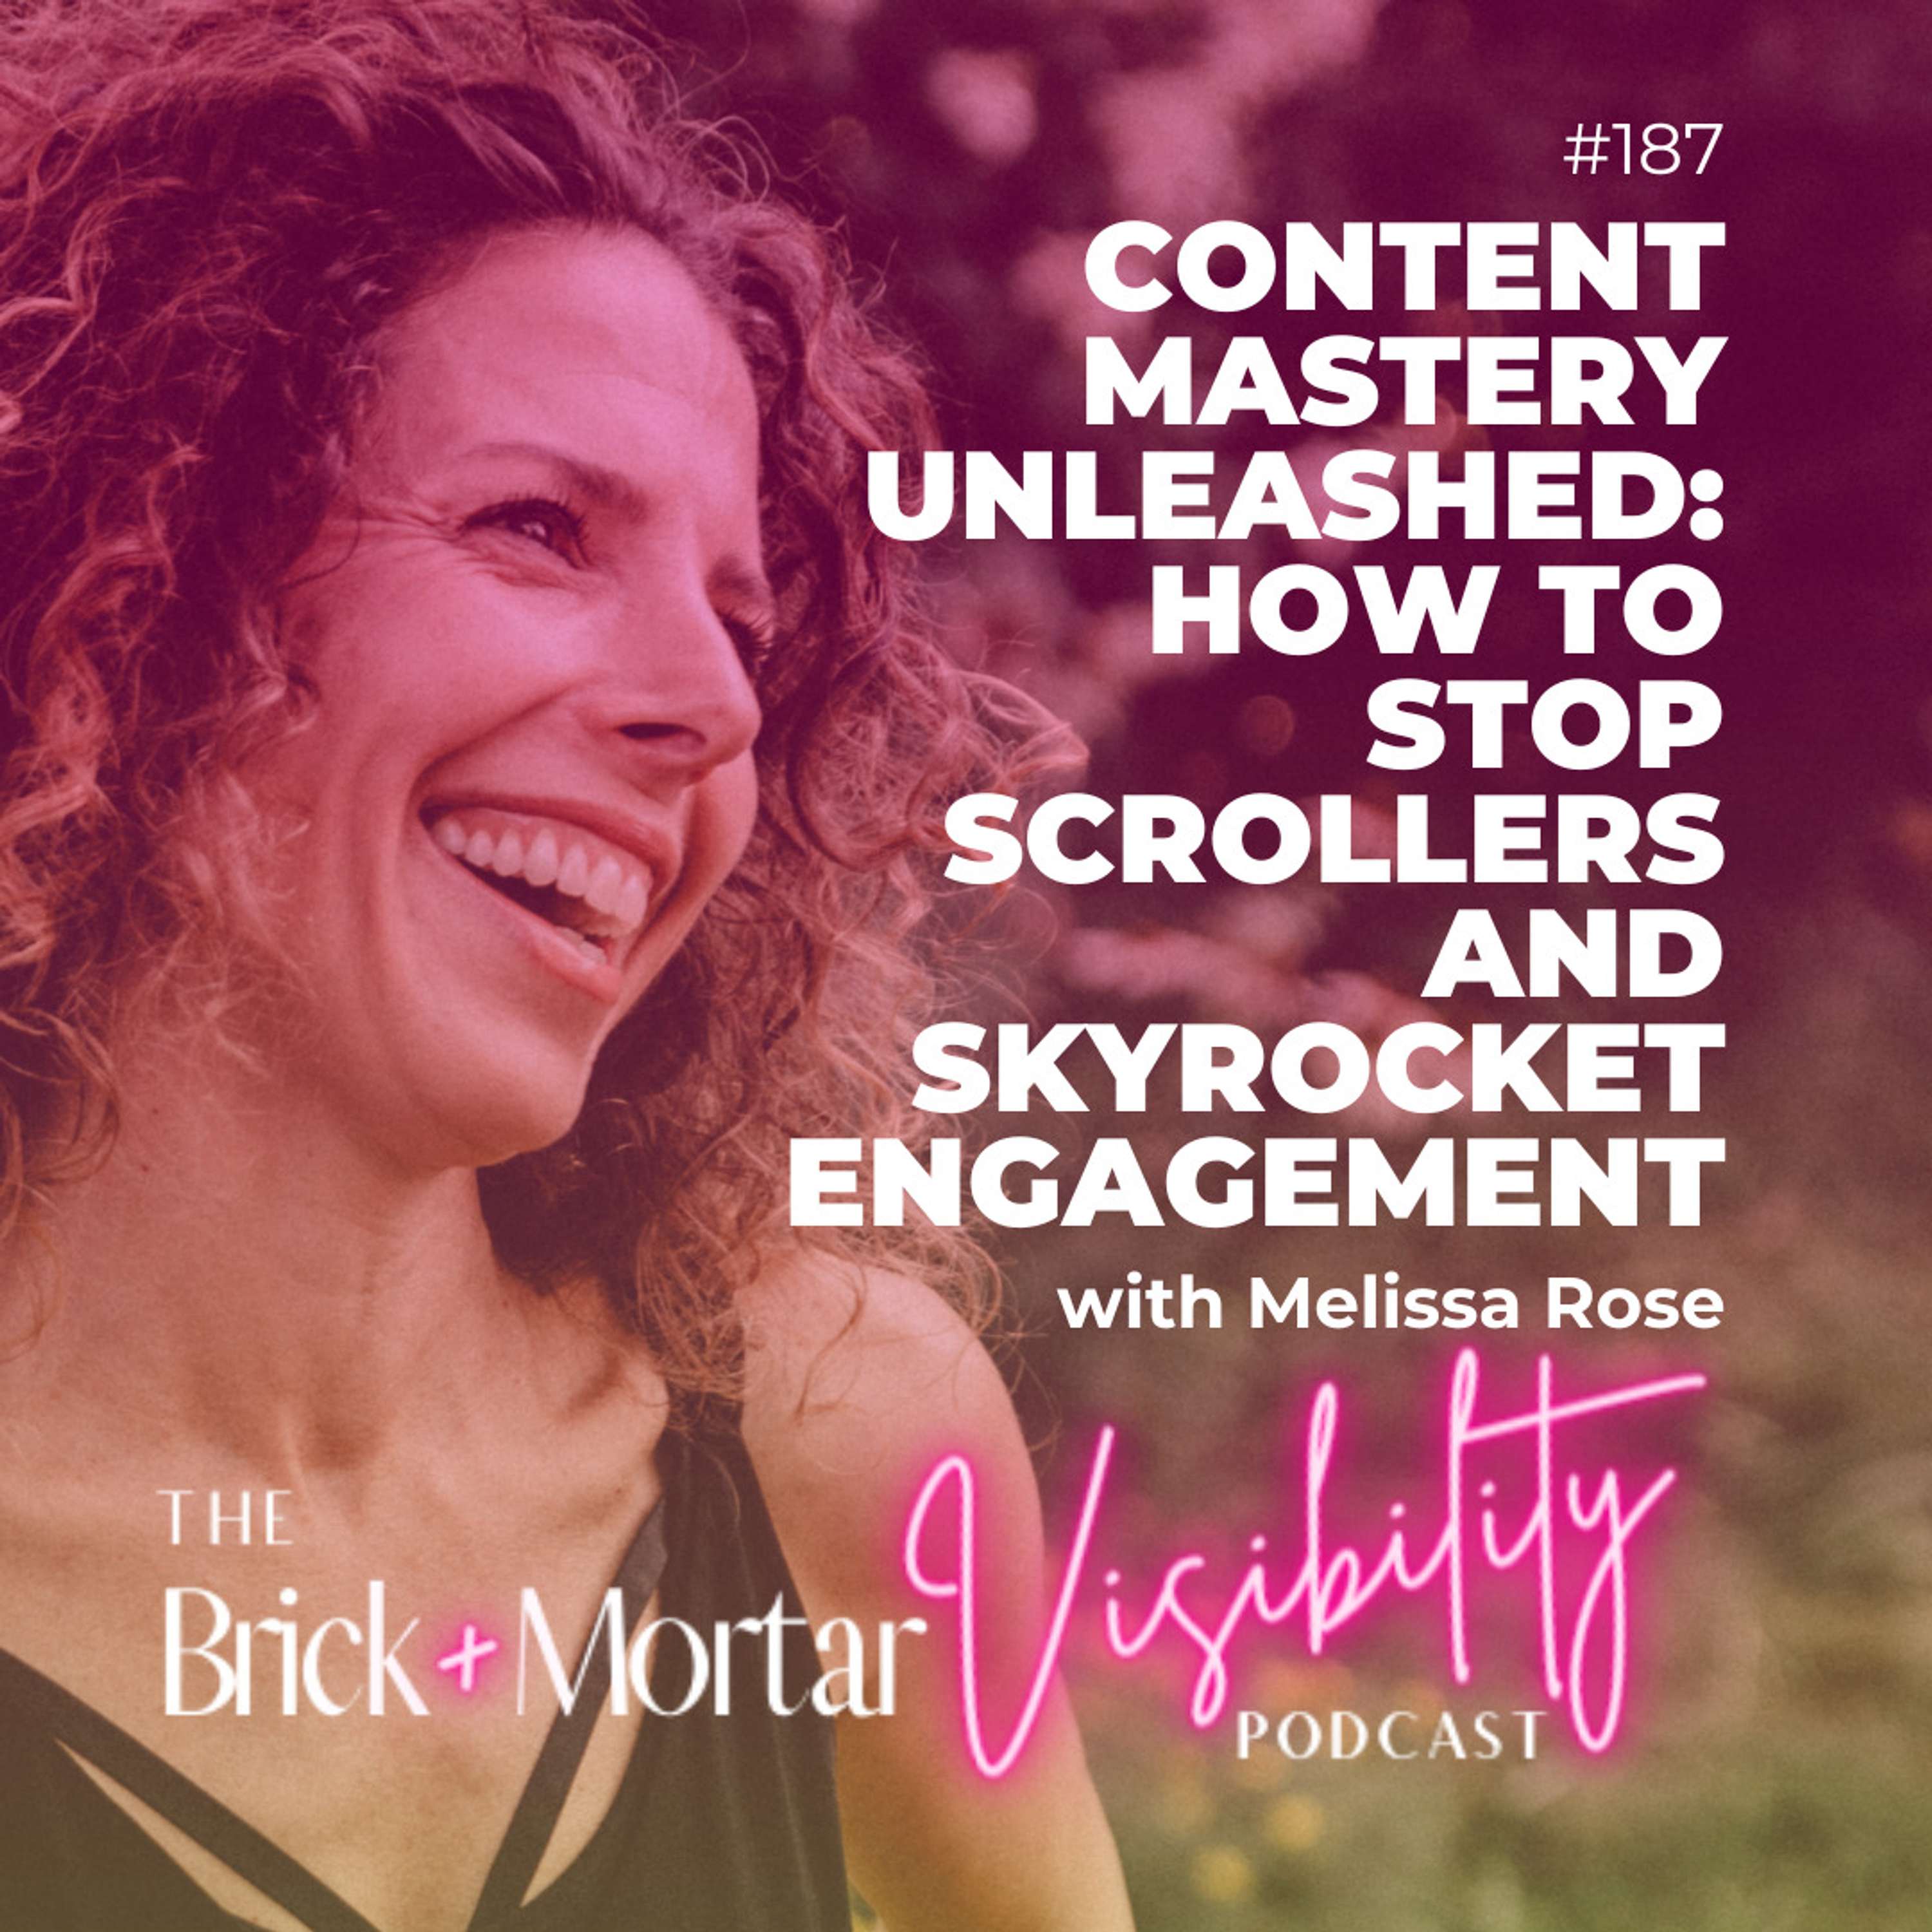 Content Mastery Unleashed: How to Stop Scrollers and Skyrocket Engagement